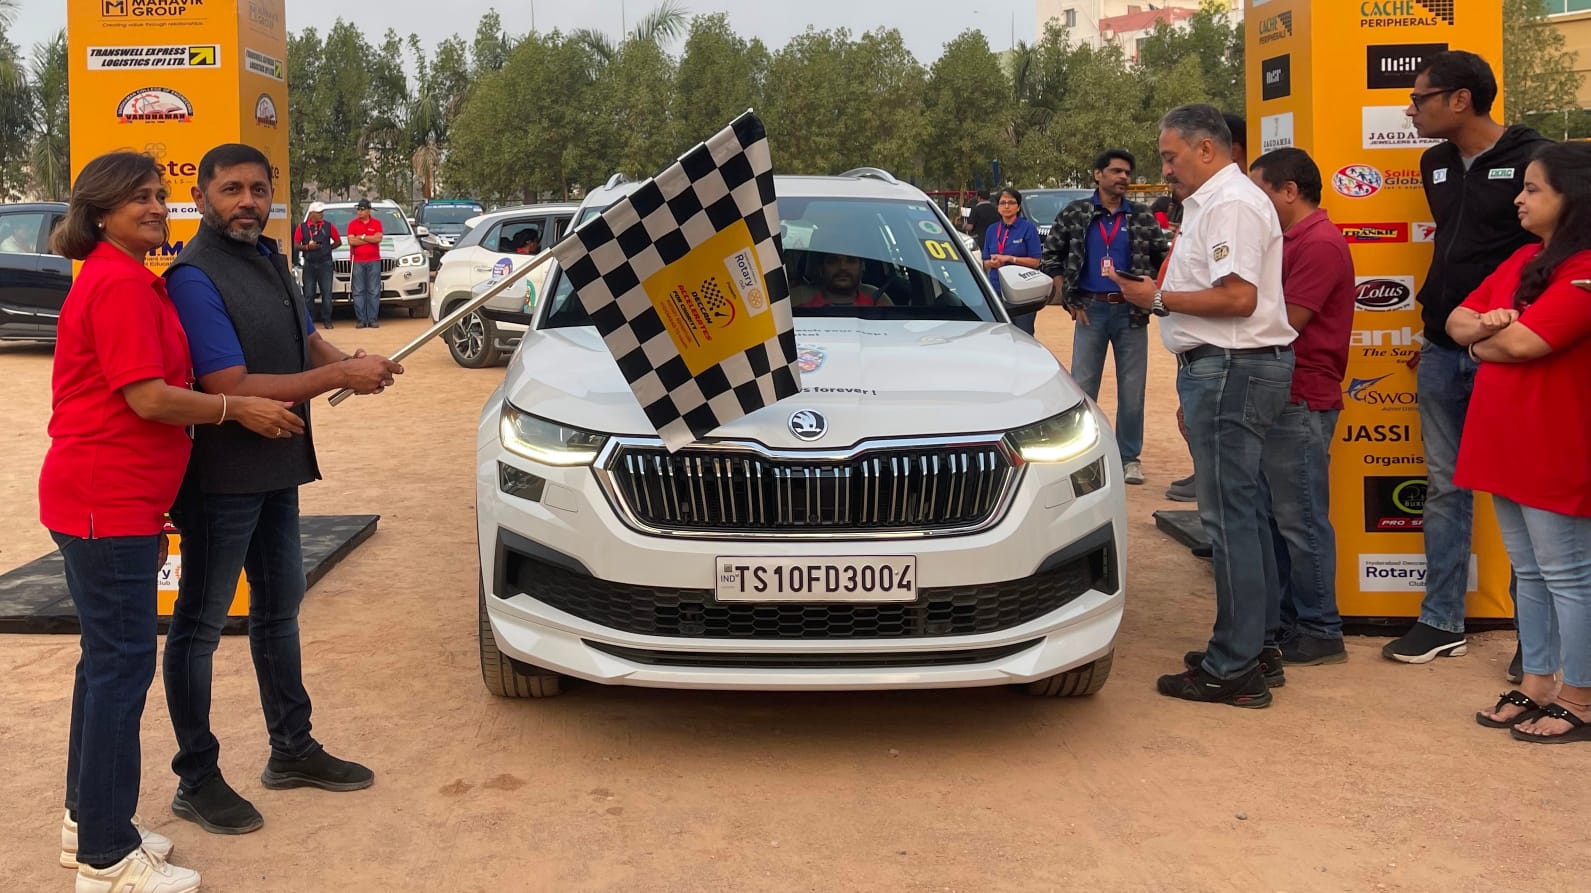 The Rotary Club of Hyderabad Deccan (RCHD) marked a milestone in community service with the inaugural "Deccan Accelerates for Charity" Time, Speed, and Distance Car Rally.